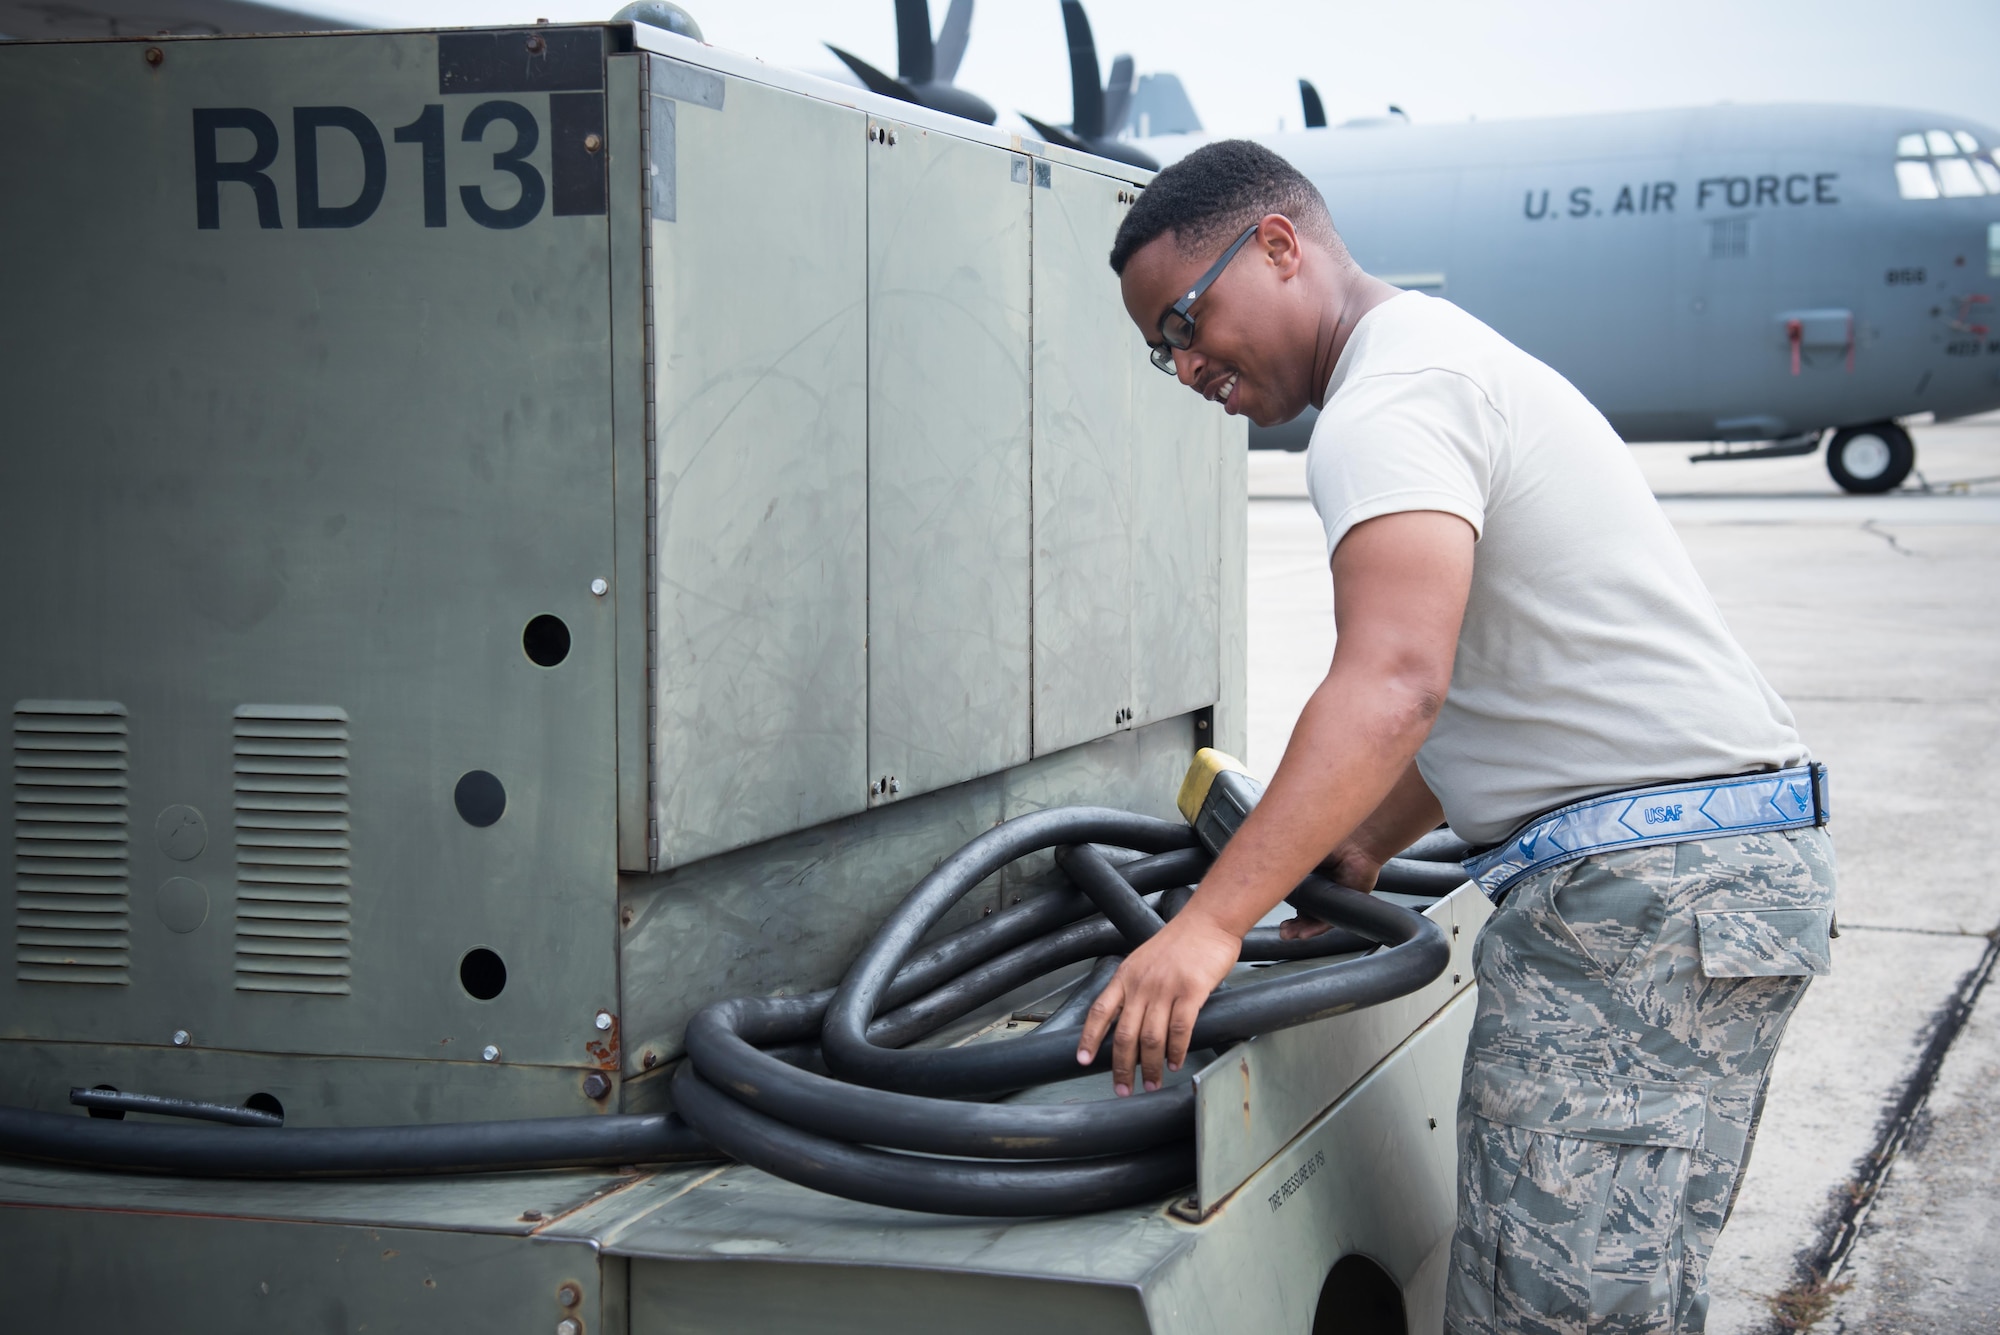 Senior Airman Fadarious Woods, 913th Maintenance Squadron crew chief from Little Rock Air Force Base, Arkansas, returns a power cord to its proper place on a generator july 21, 2017 at Keesler AFB, Mississippi. (U.S. Air Force photo/Staff Sgt. Heather Heiney)